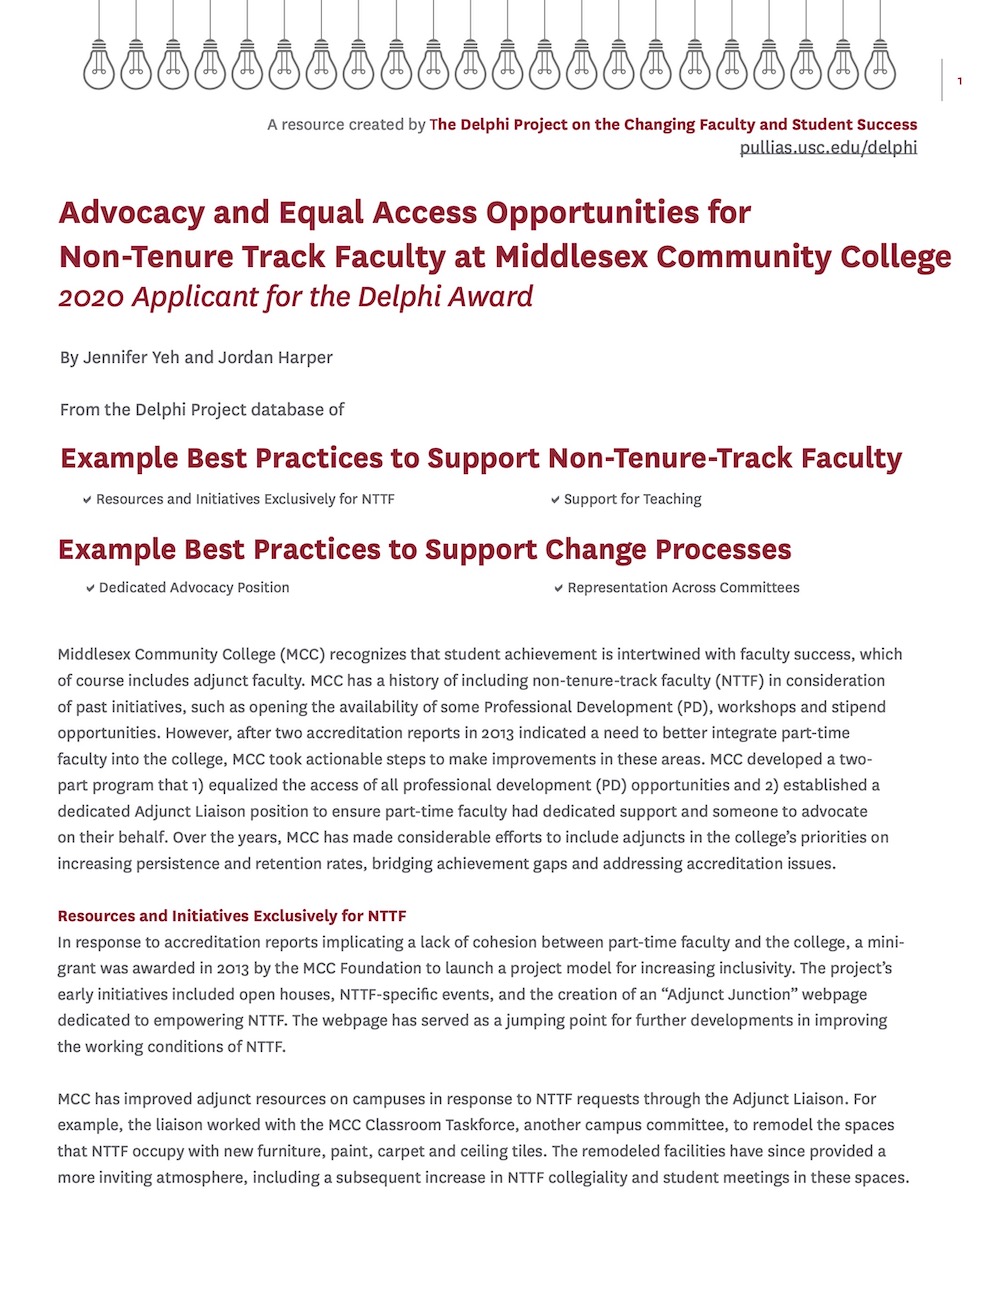 Advocacy and Equal Access Opportunities for Non-Tenure Track Faculty at Middlesex Community College